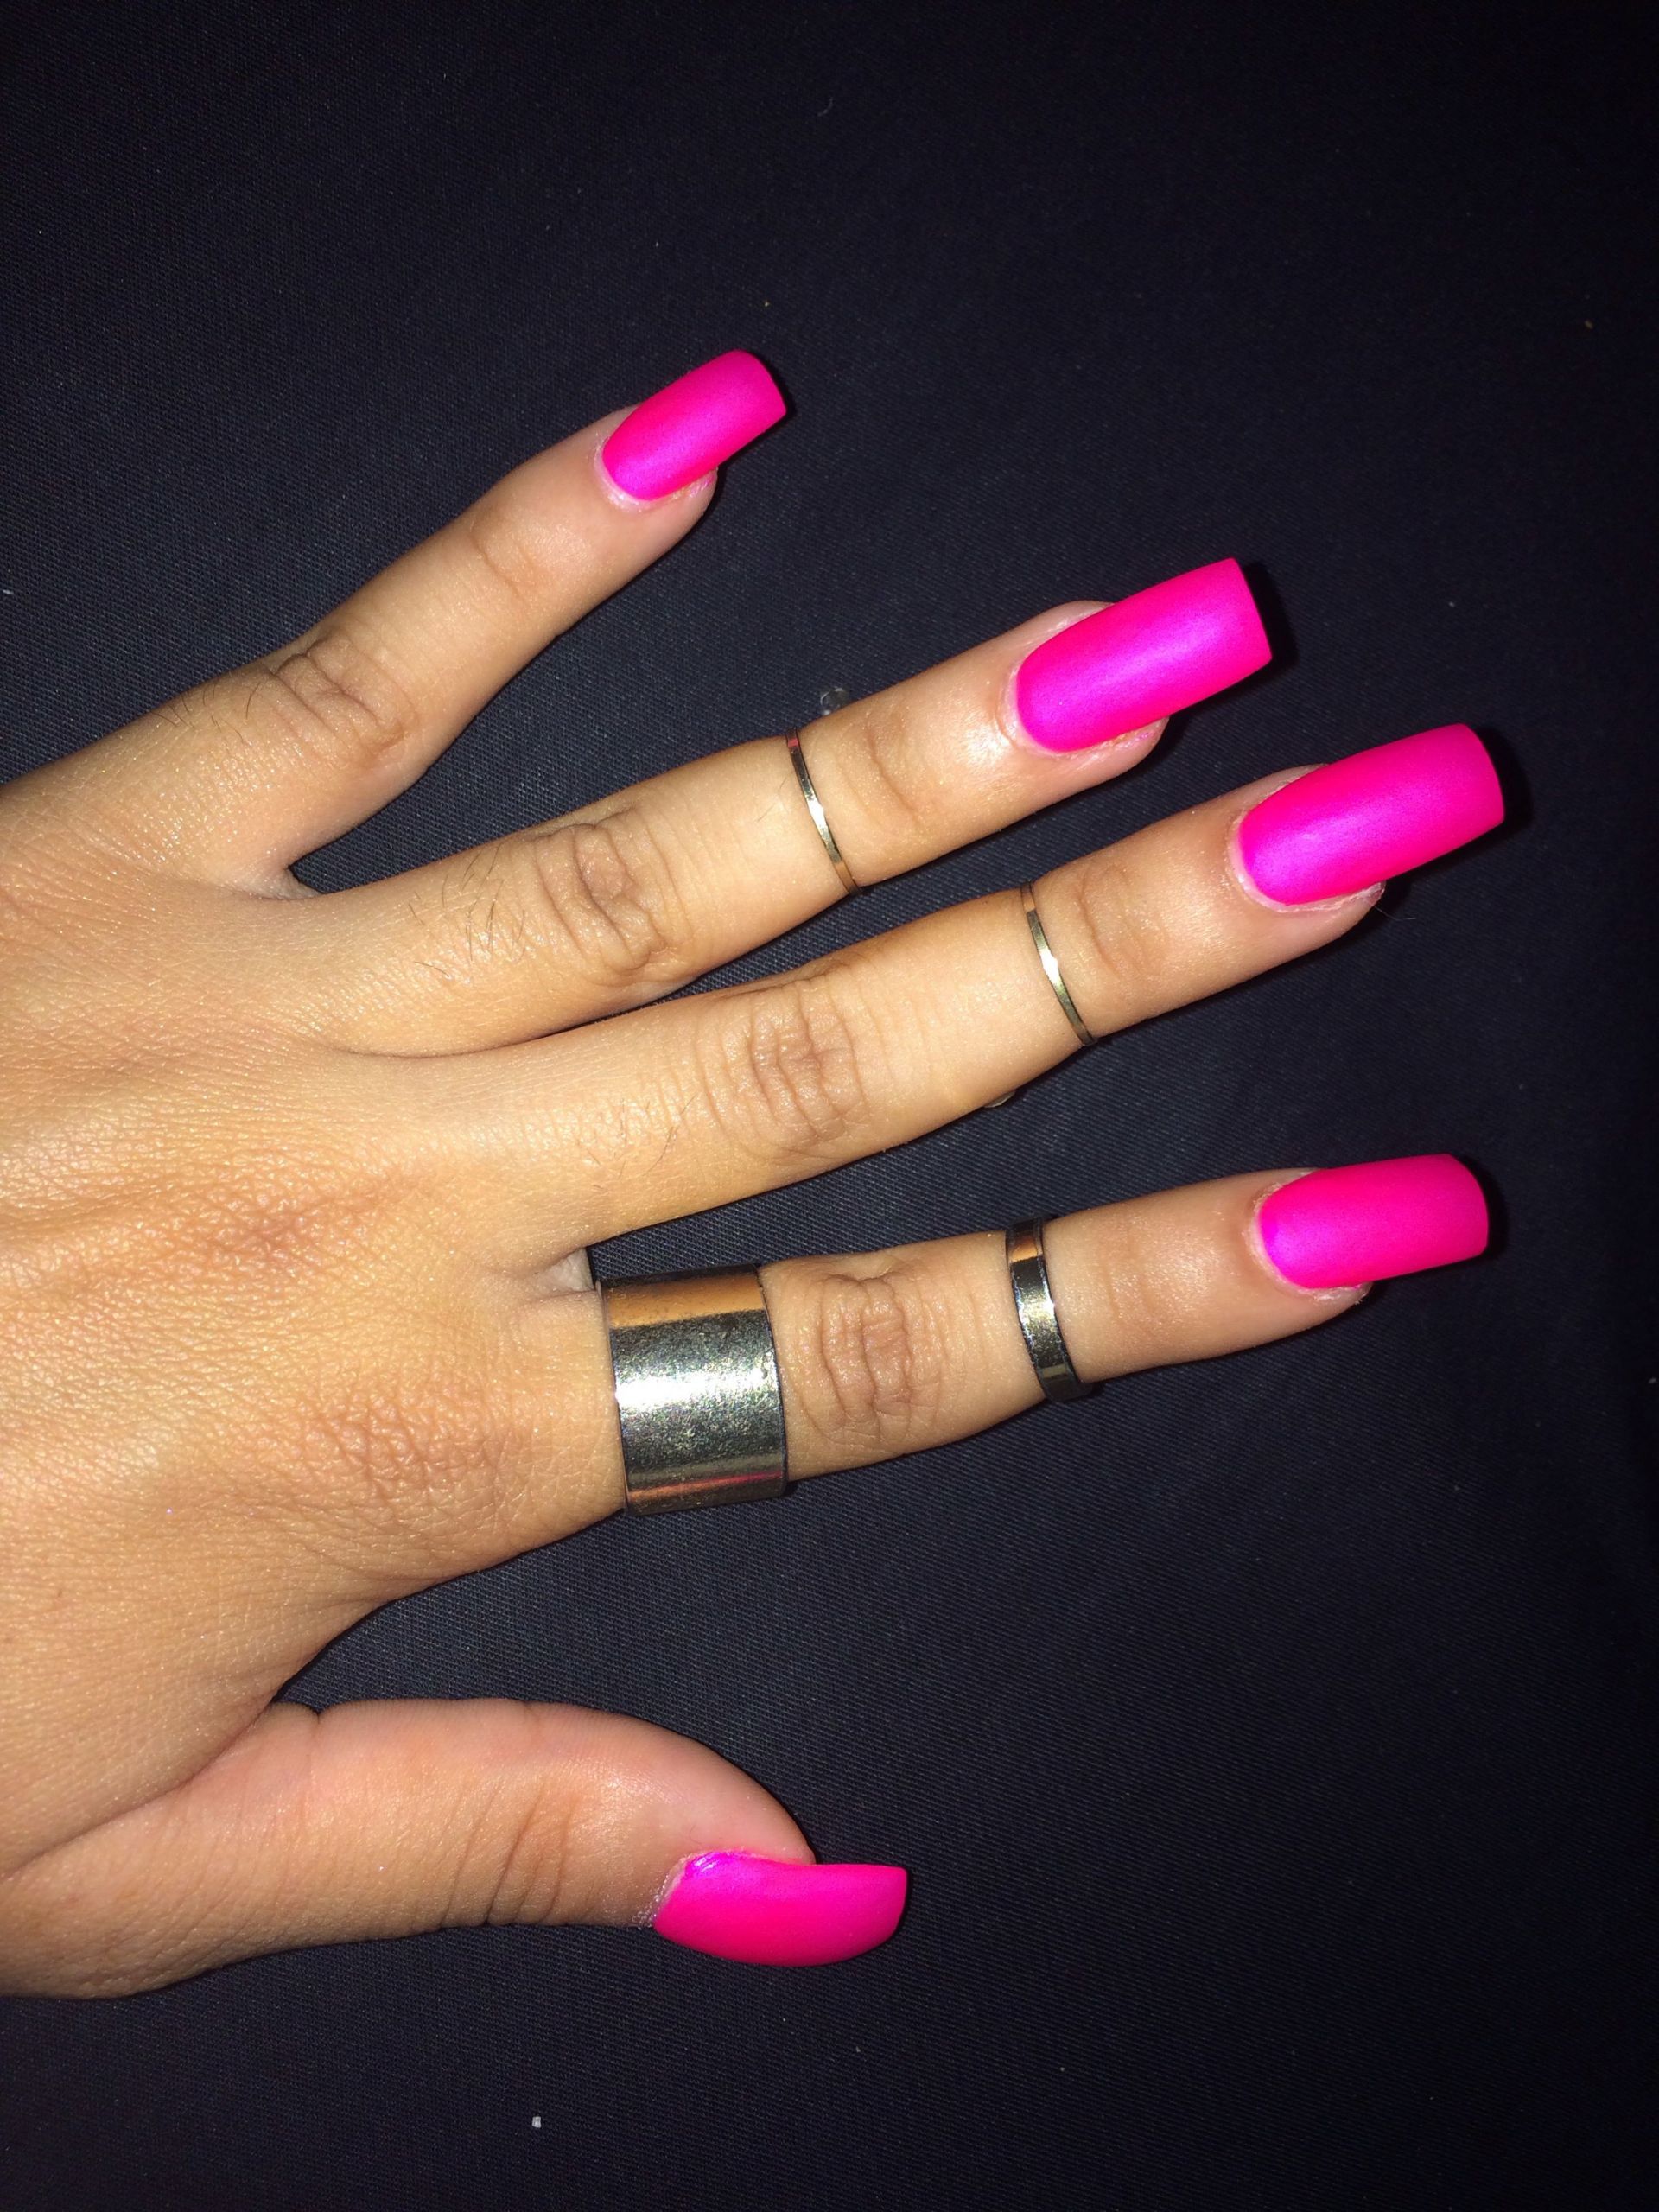 Summer Acrylic Nail Colors
 Square acrylic nails Bright pink summer color with matte